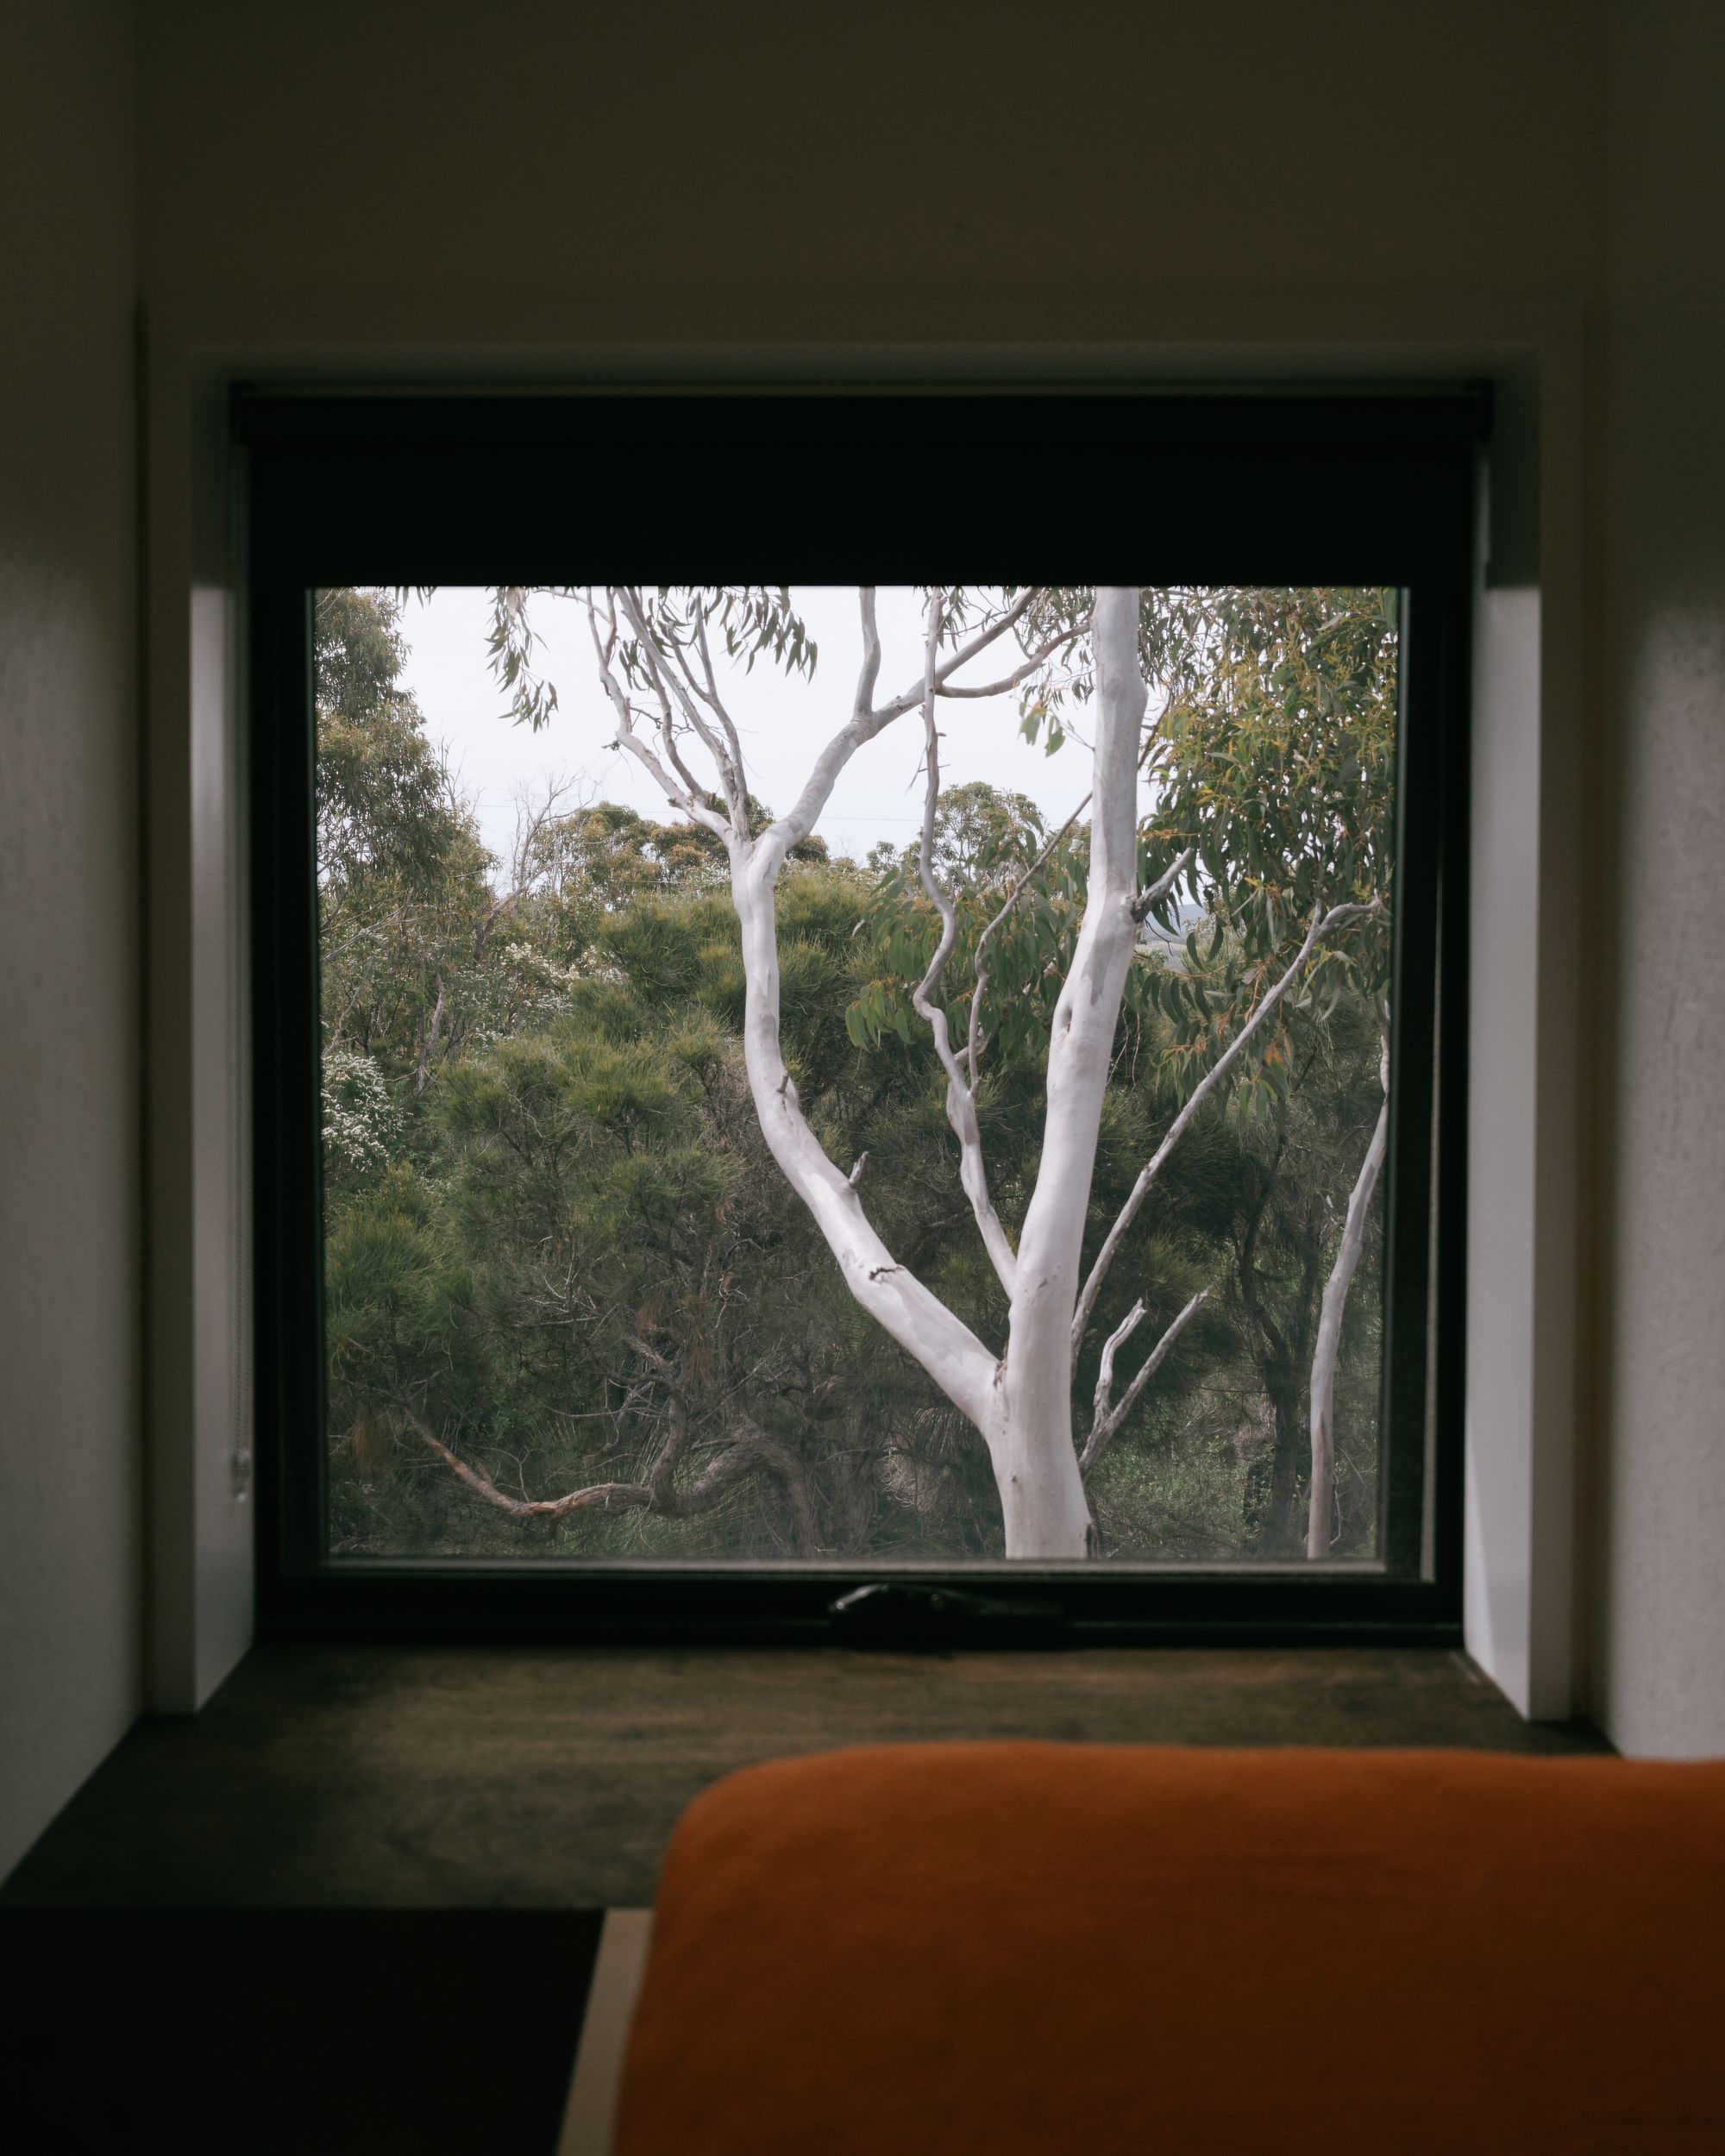 An interior view of the bedroom at DEN PLACE showing the picture window that captures the surrounding environment of Australian bush